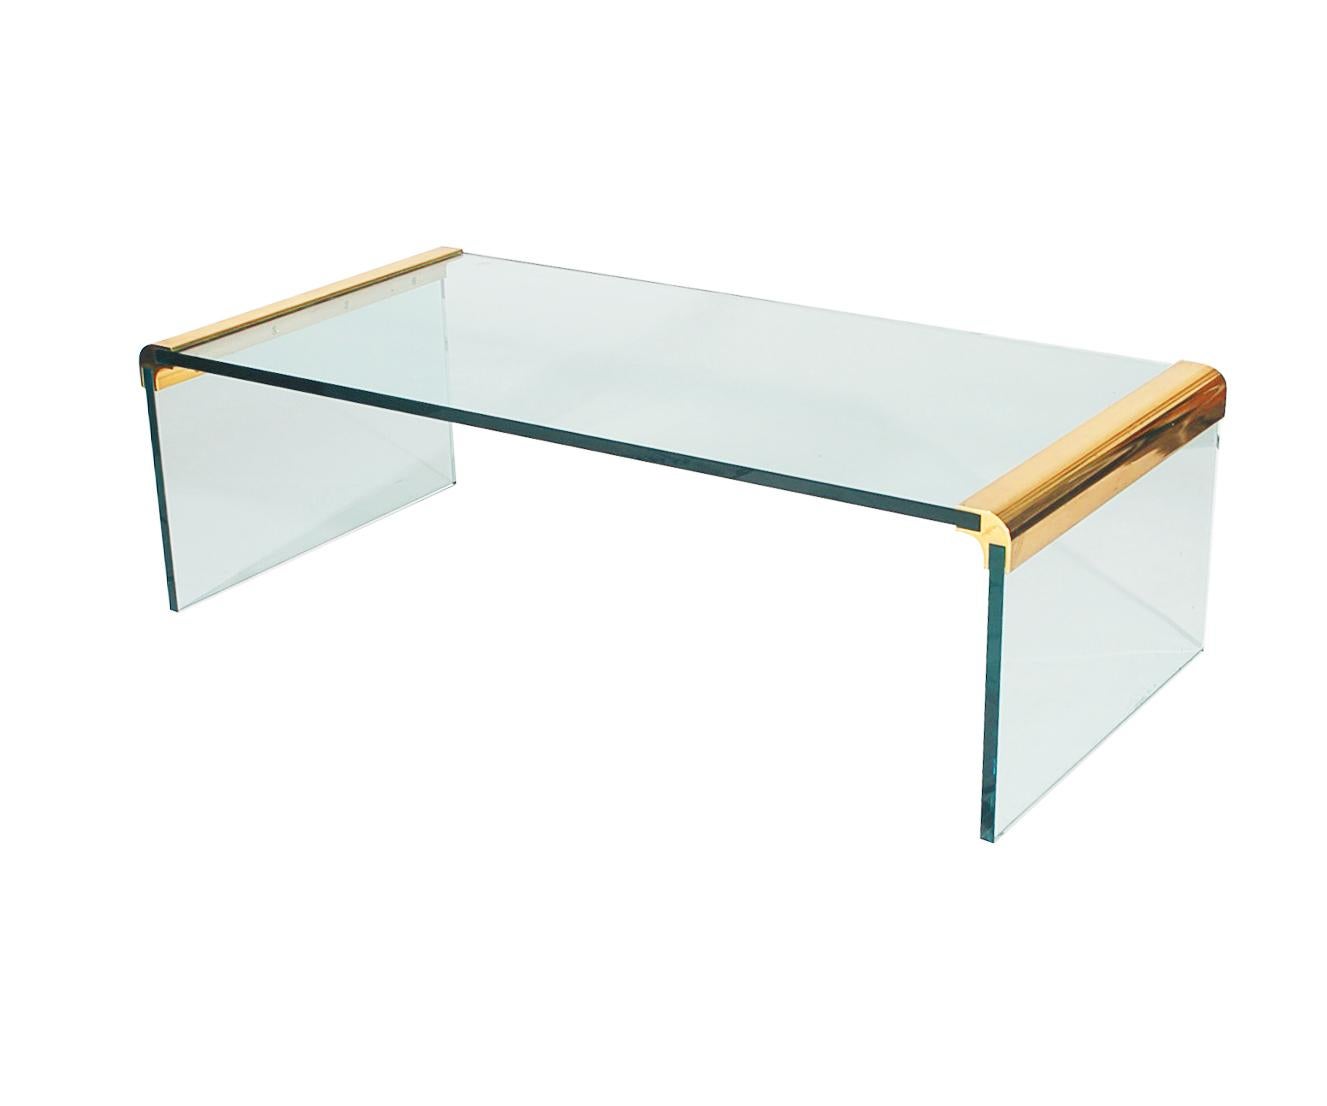 Late 20th Century Mid-Century Modern Leon Rosen for Pace Glass & Brass Waterfall Coffee Table